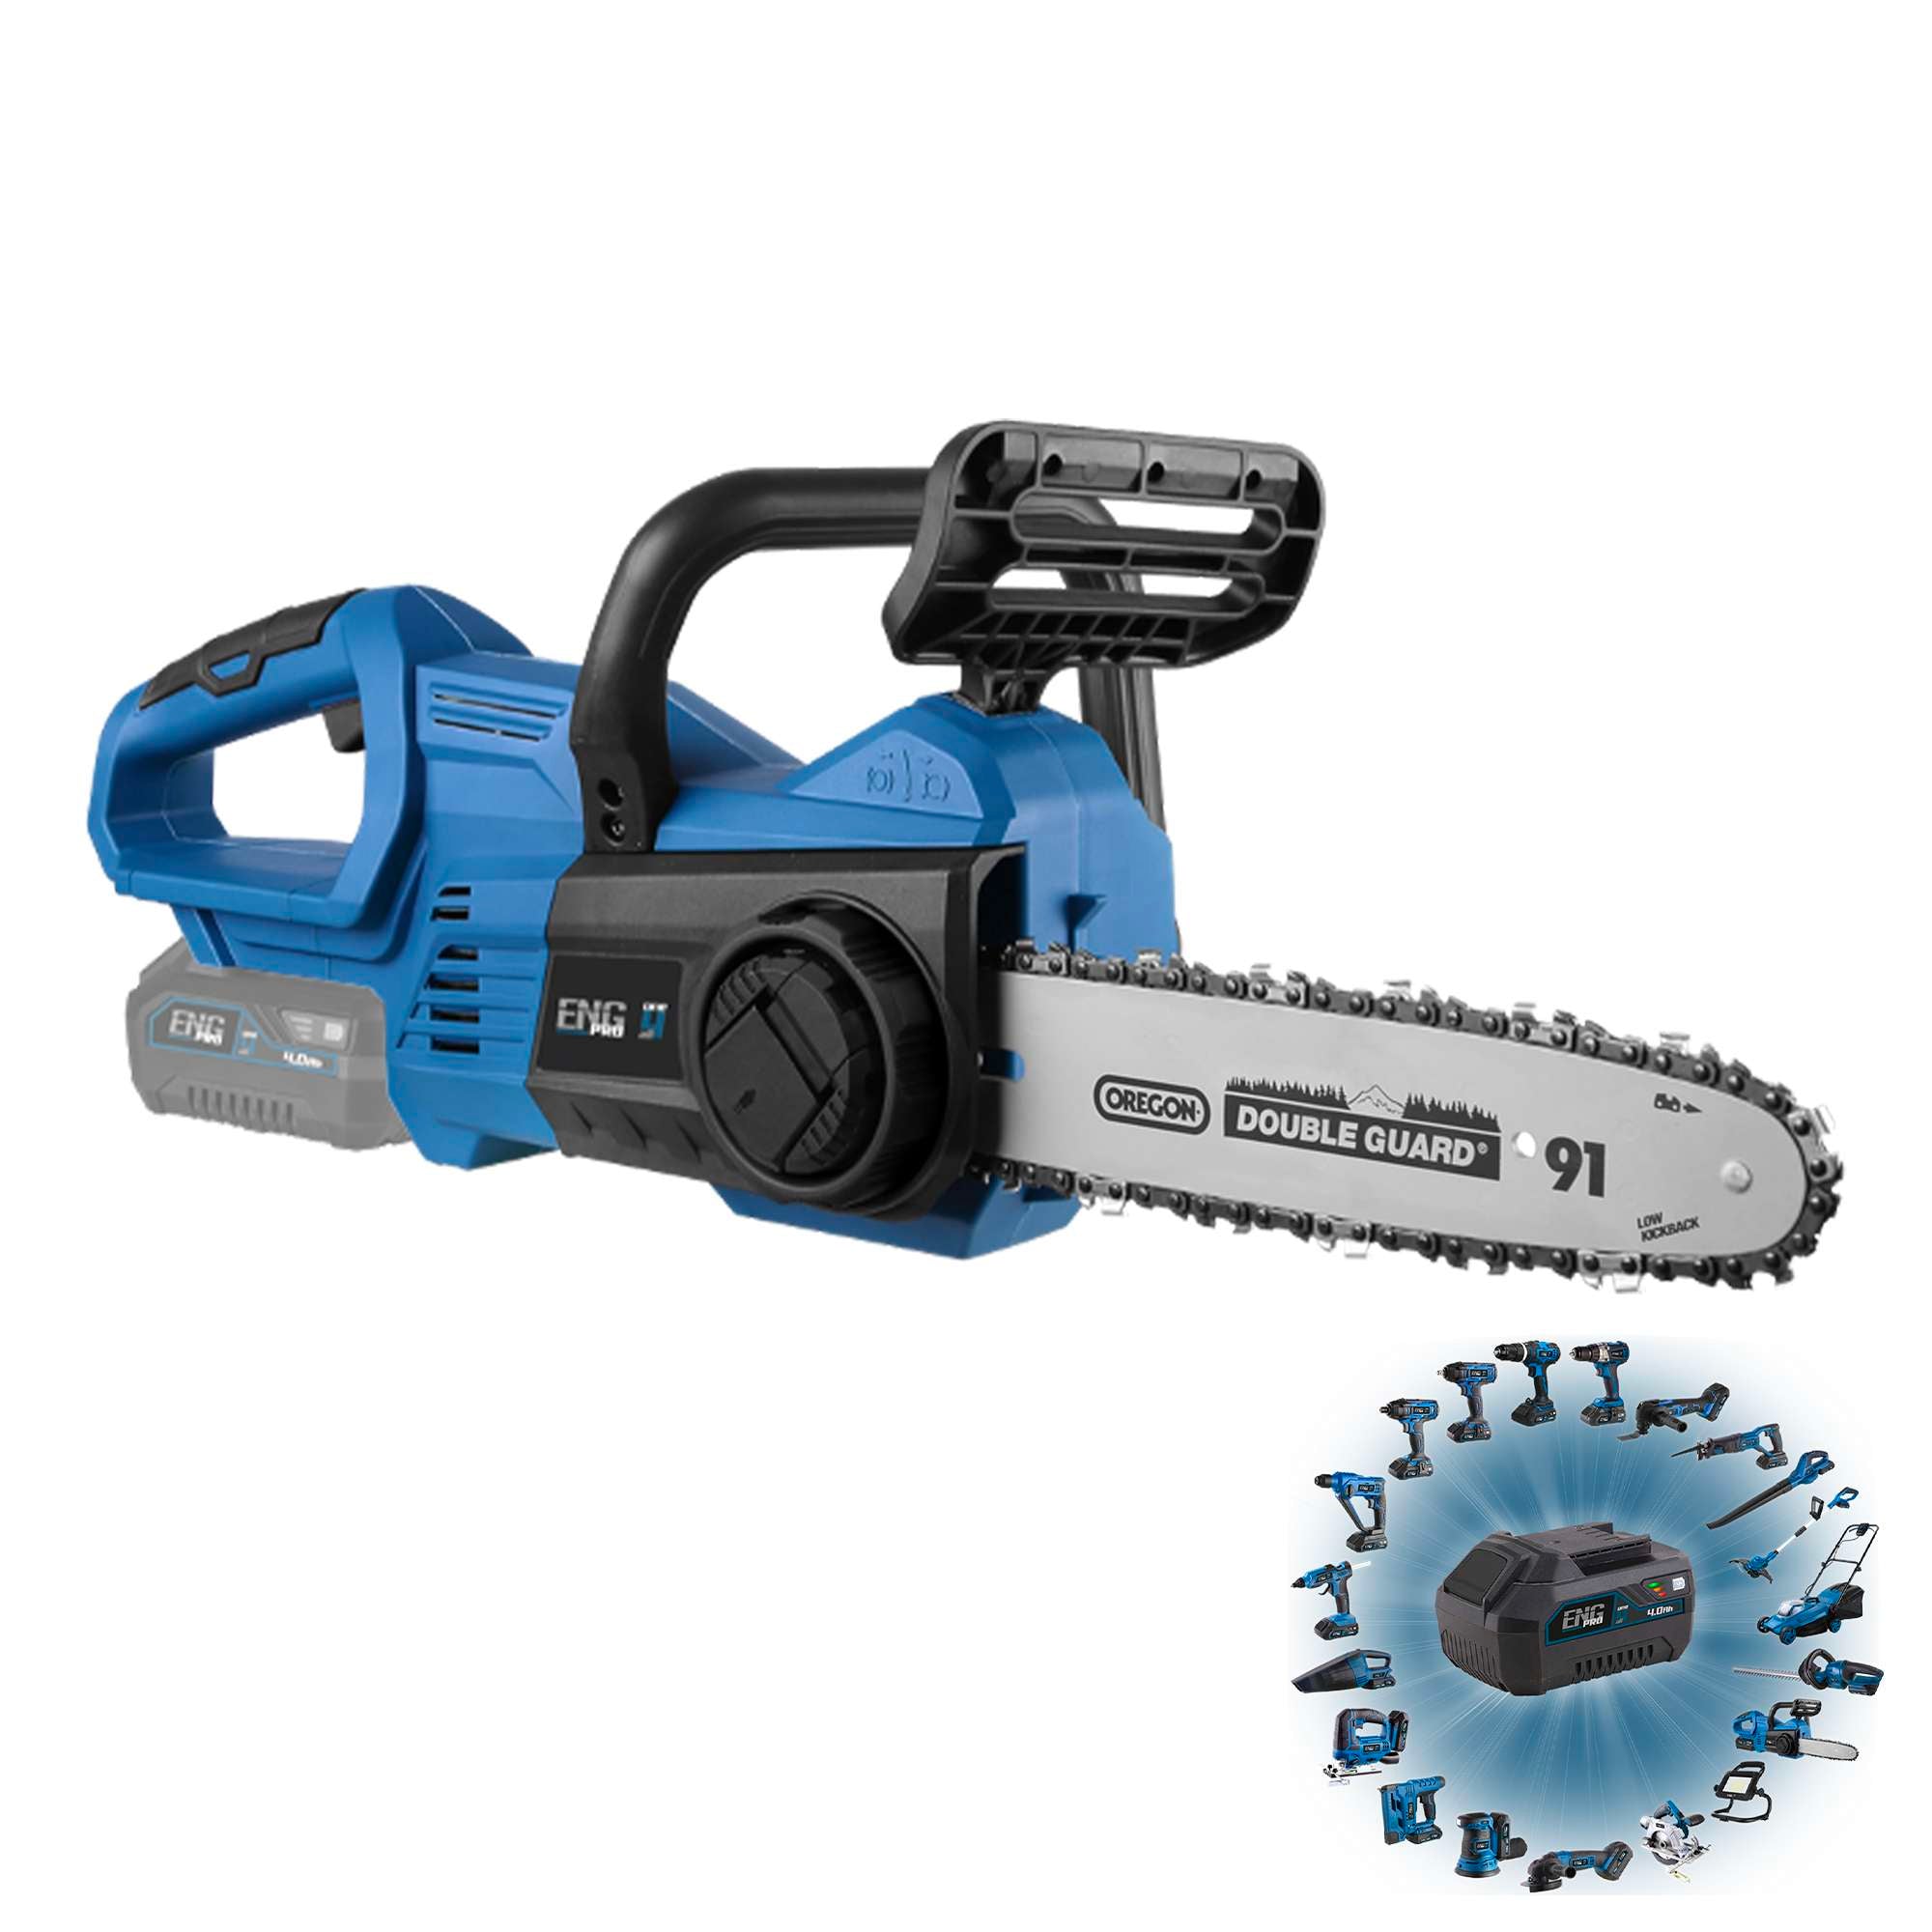 Cordless Chain Saw - Professional Line ONE4ALL 20V ENGPRO 1B20-ES00